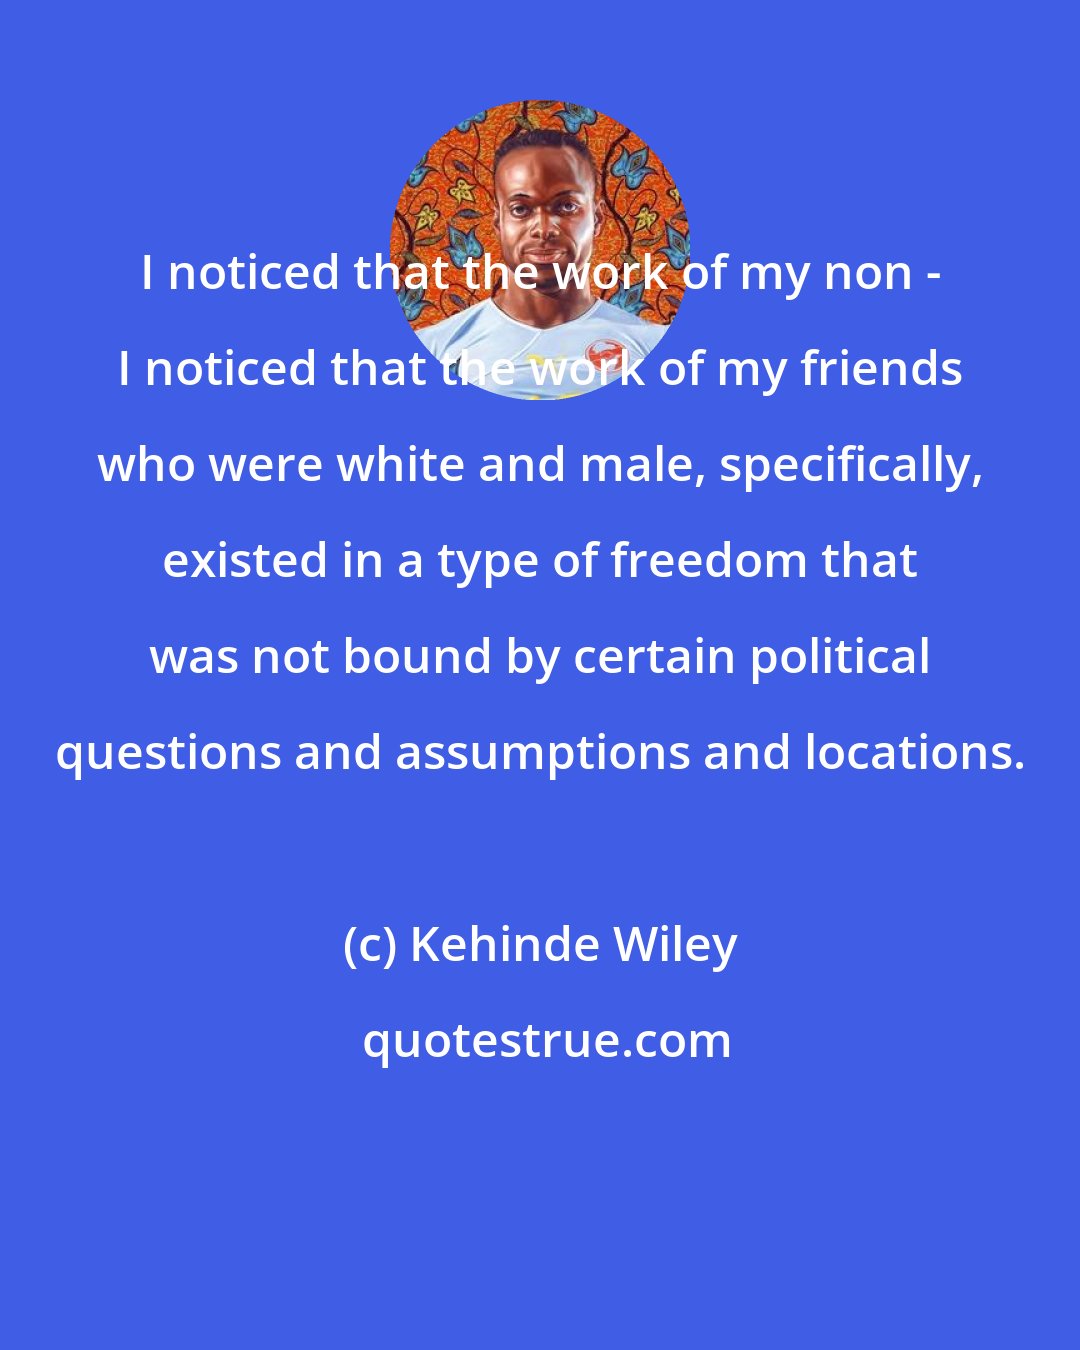 Kehinde Wiley: I noticed that the work of my non - I noticed that the work of my friends who were white and male, specifically, existed in a type of freedom that was not bound by certain political questions and assumptions and locations.